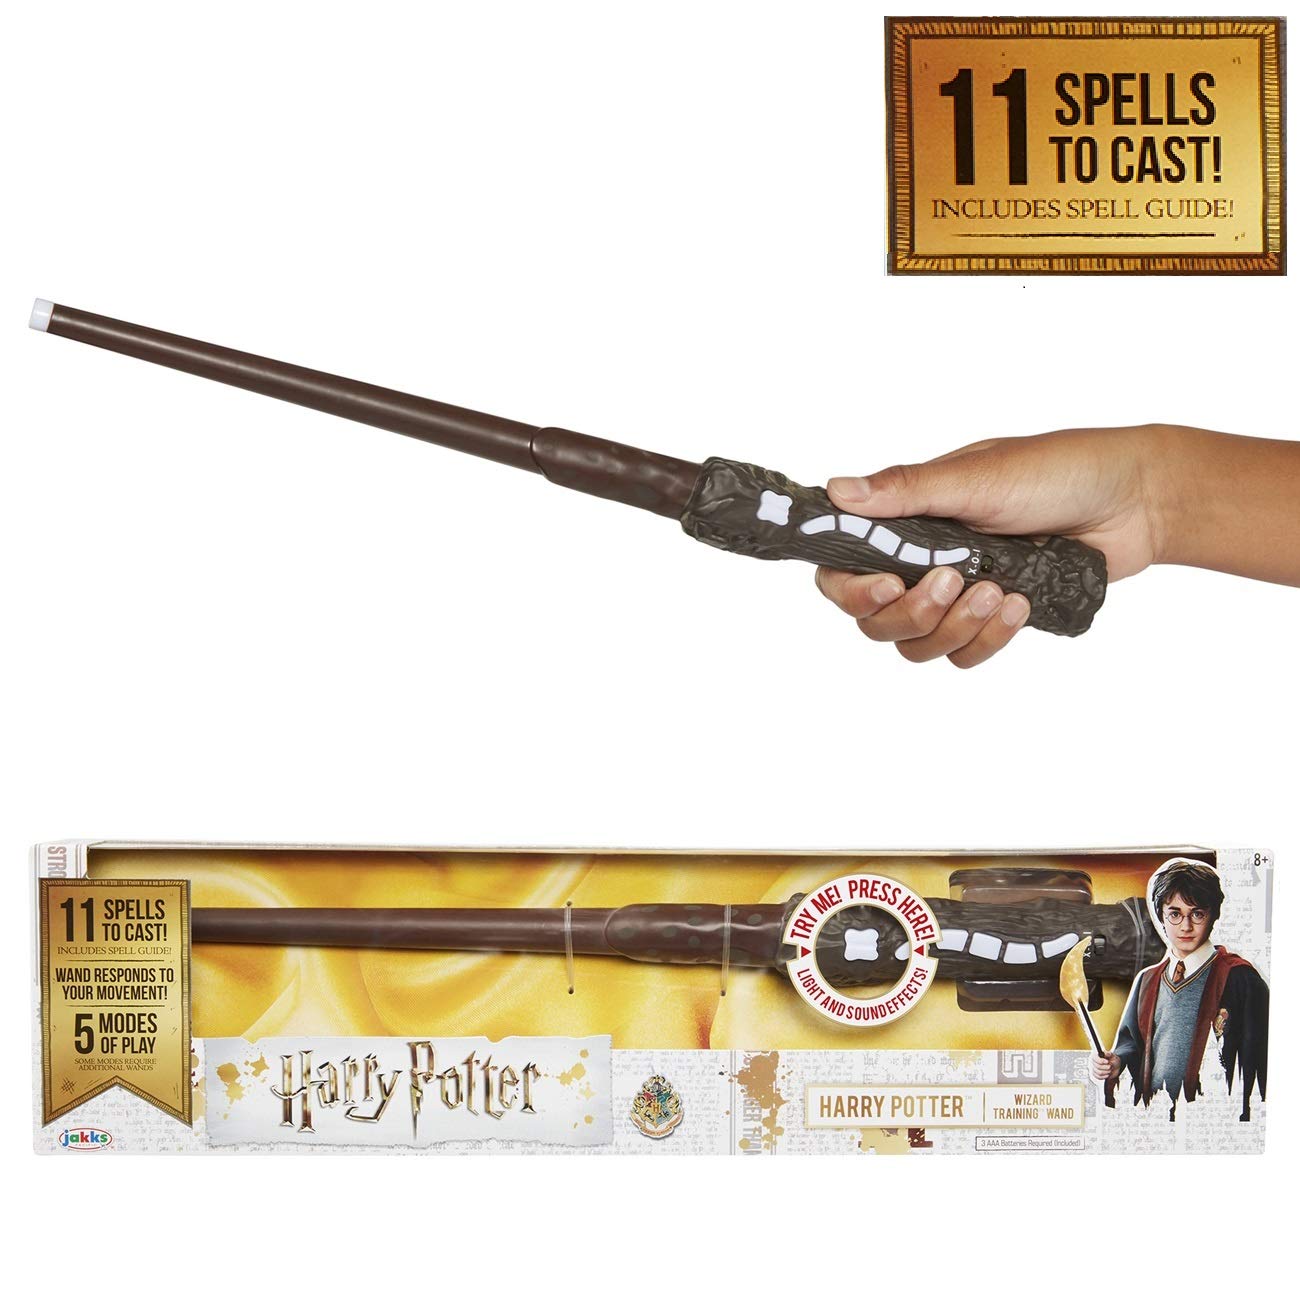 Harry Potter's Wand Interactive Wizard Training Wand - image 1 of 7